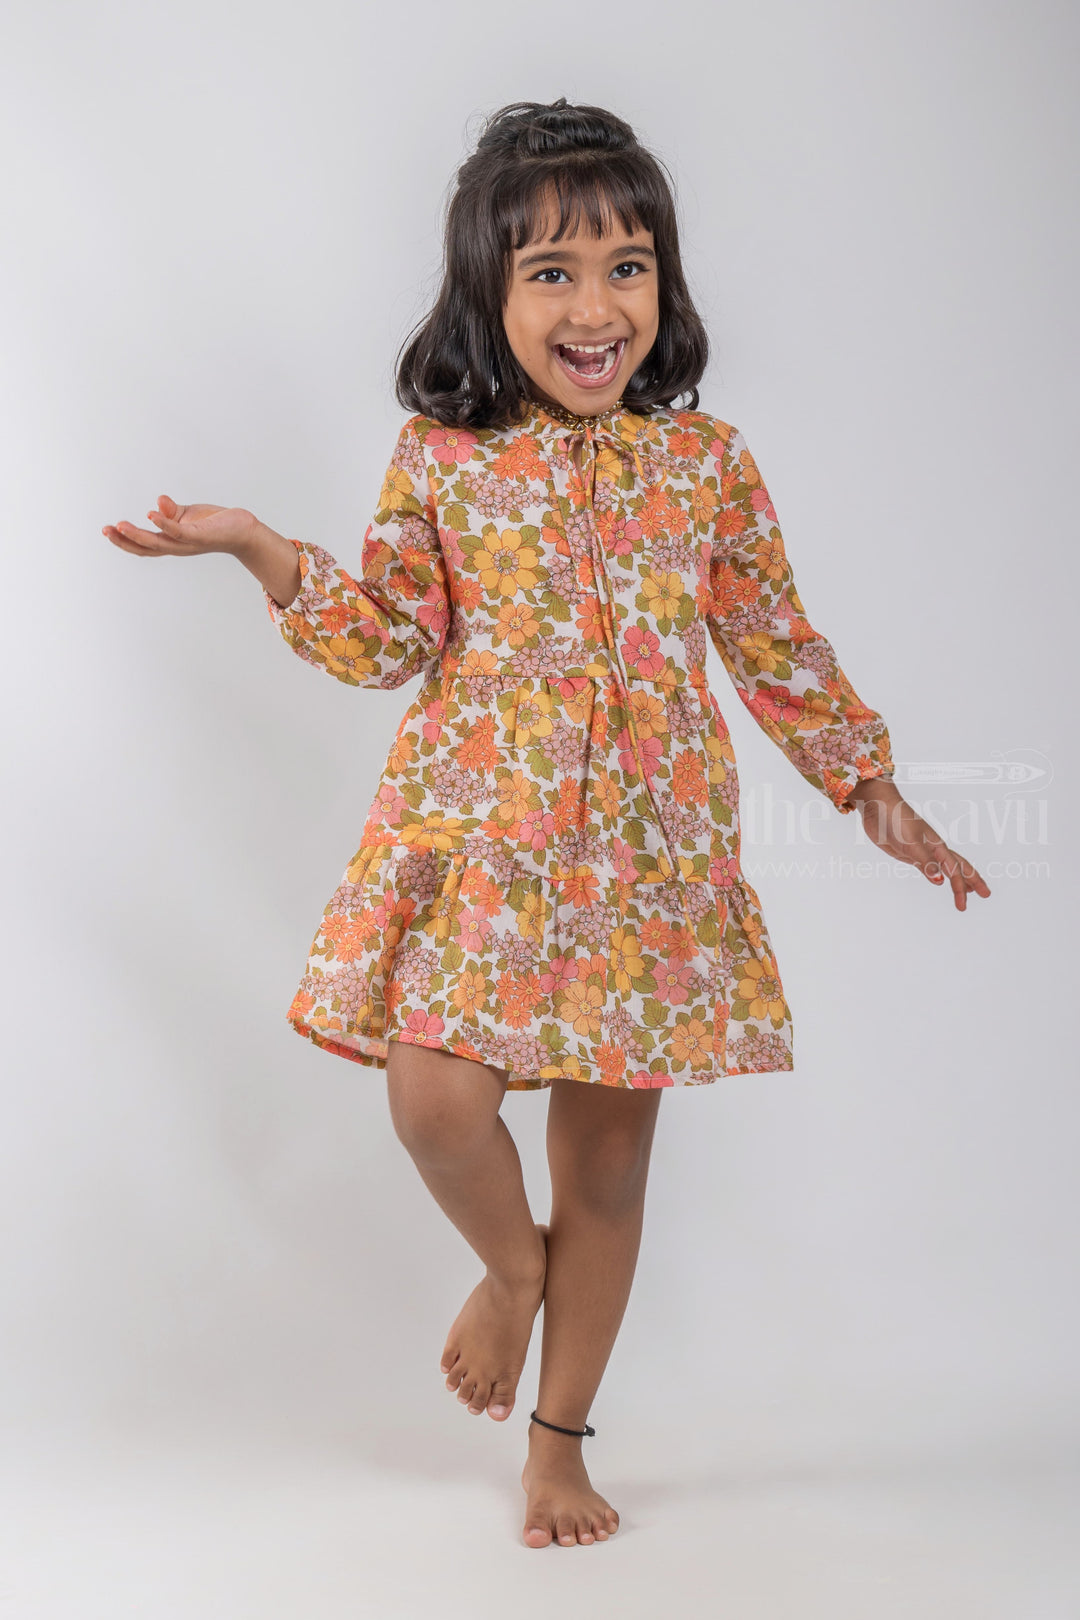 The Nesavu Girls Fancy Frock Alluring Multi-Colored Floral Printed Baloon Sleeve Cotton Frock For Girls psr silks Nesavu 18 (2Y) / multicolor GFC1040A